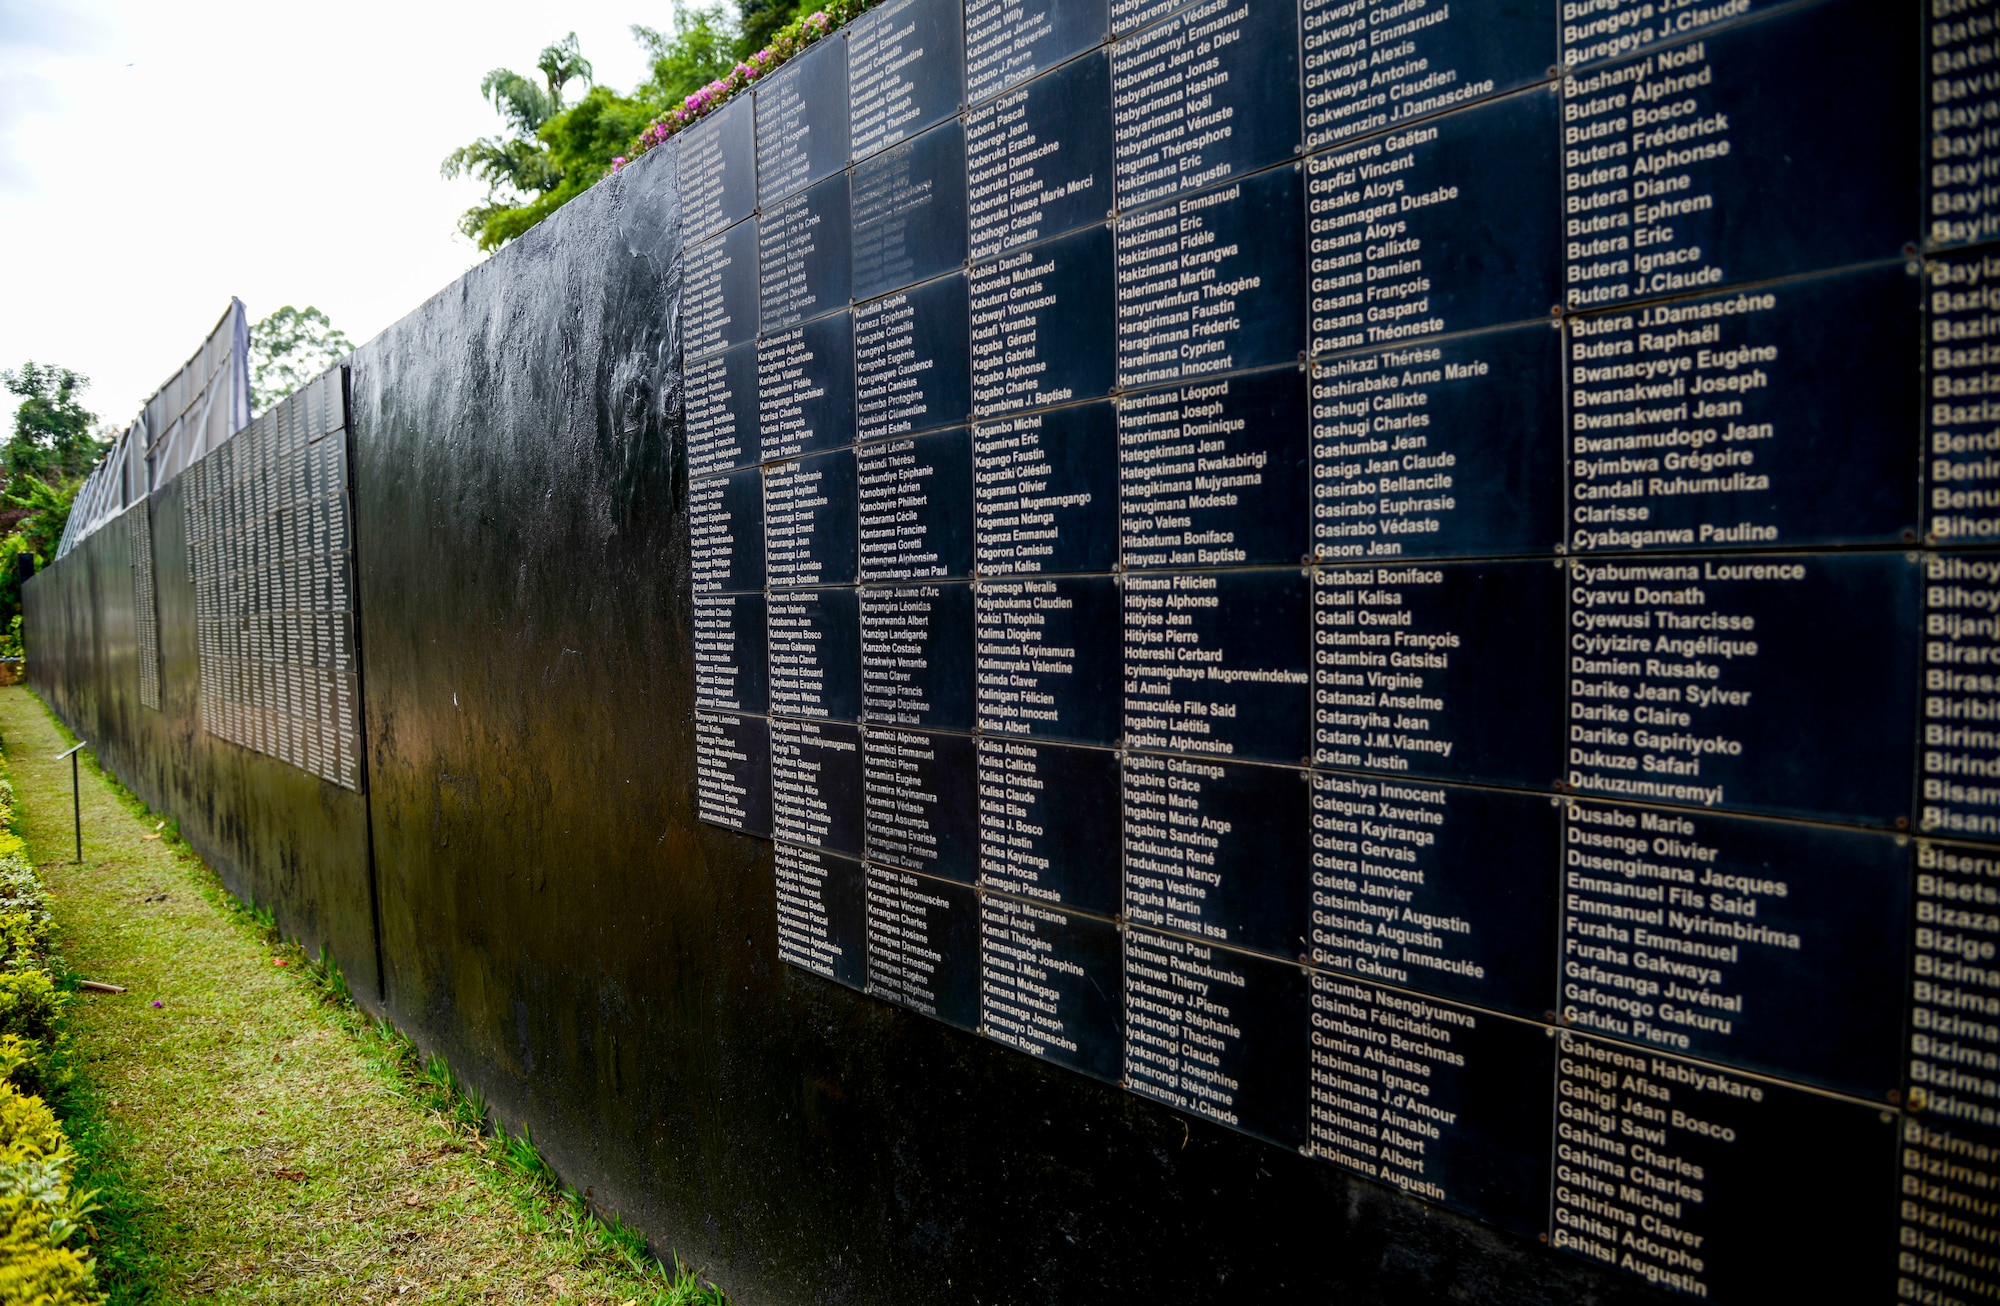 Names of some of the victims of the Rwandan genocide are displayed on a wall at the Kigali Genocide Memorial in Kigali, Rwanda, March 4, 2019. Though only about 800 names are displayed, the memorial, which is only one of nearly 200 memorial around the country, has approximately 250,000 victims buried there. Participants in the African Partnership Flight Rwanda visited the memorial to pay their respect and learn about the country hosting them. (U.S. Air Force photo by Tech. Sgt. Timothy Moore)